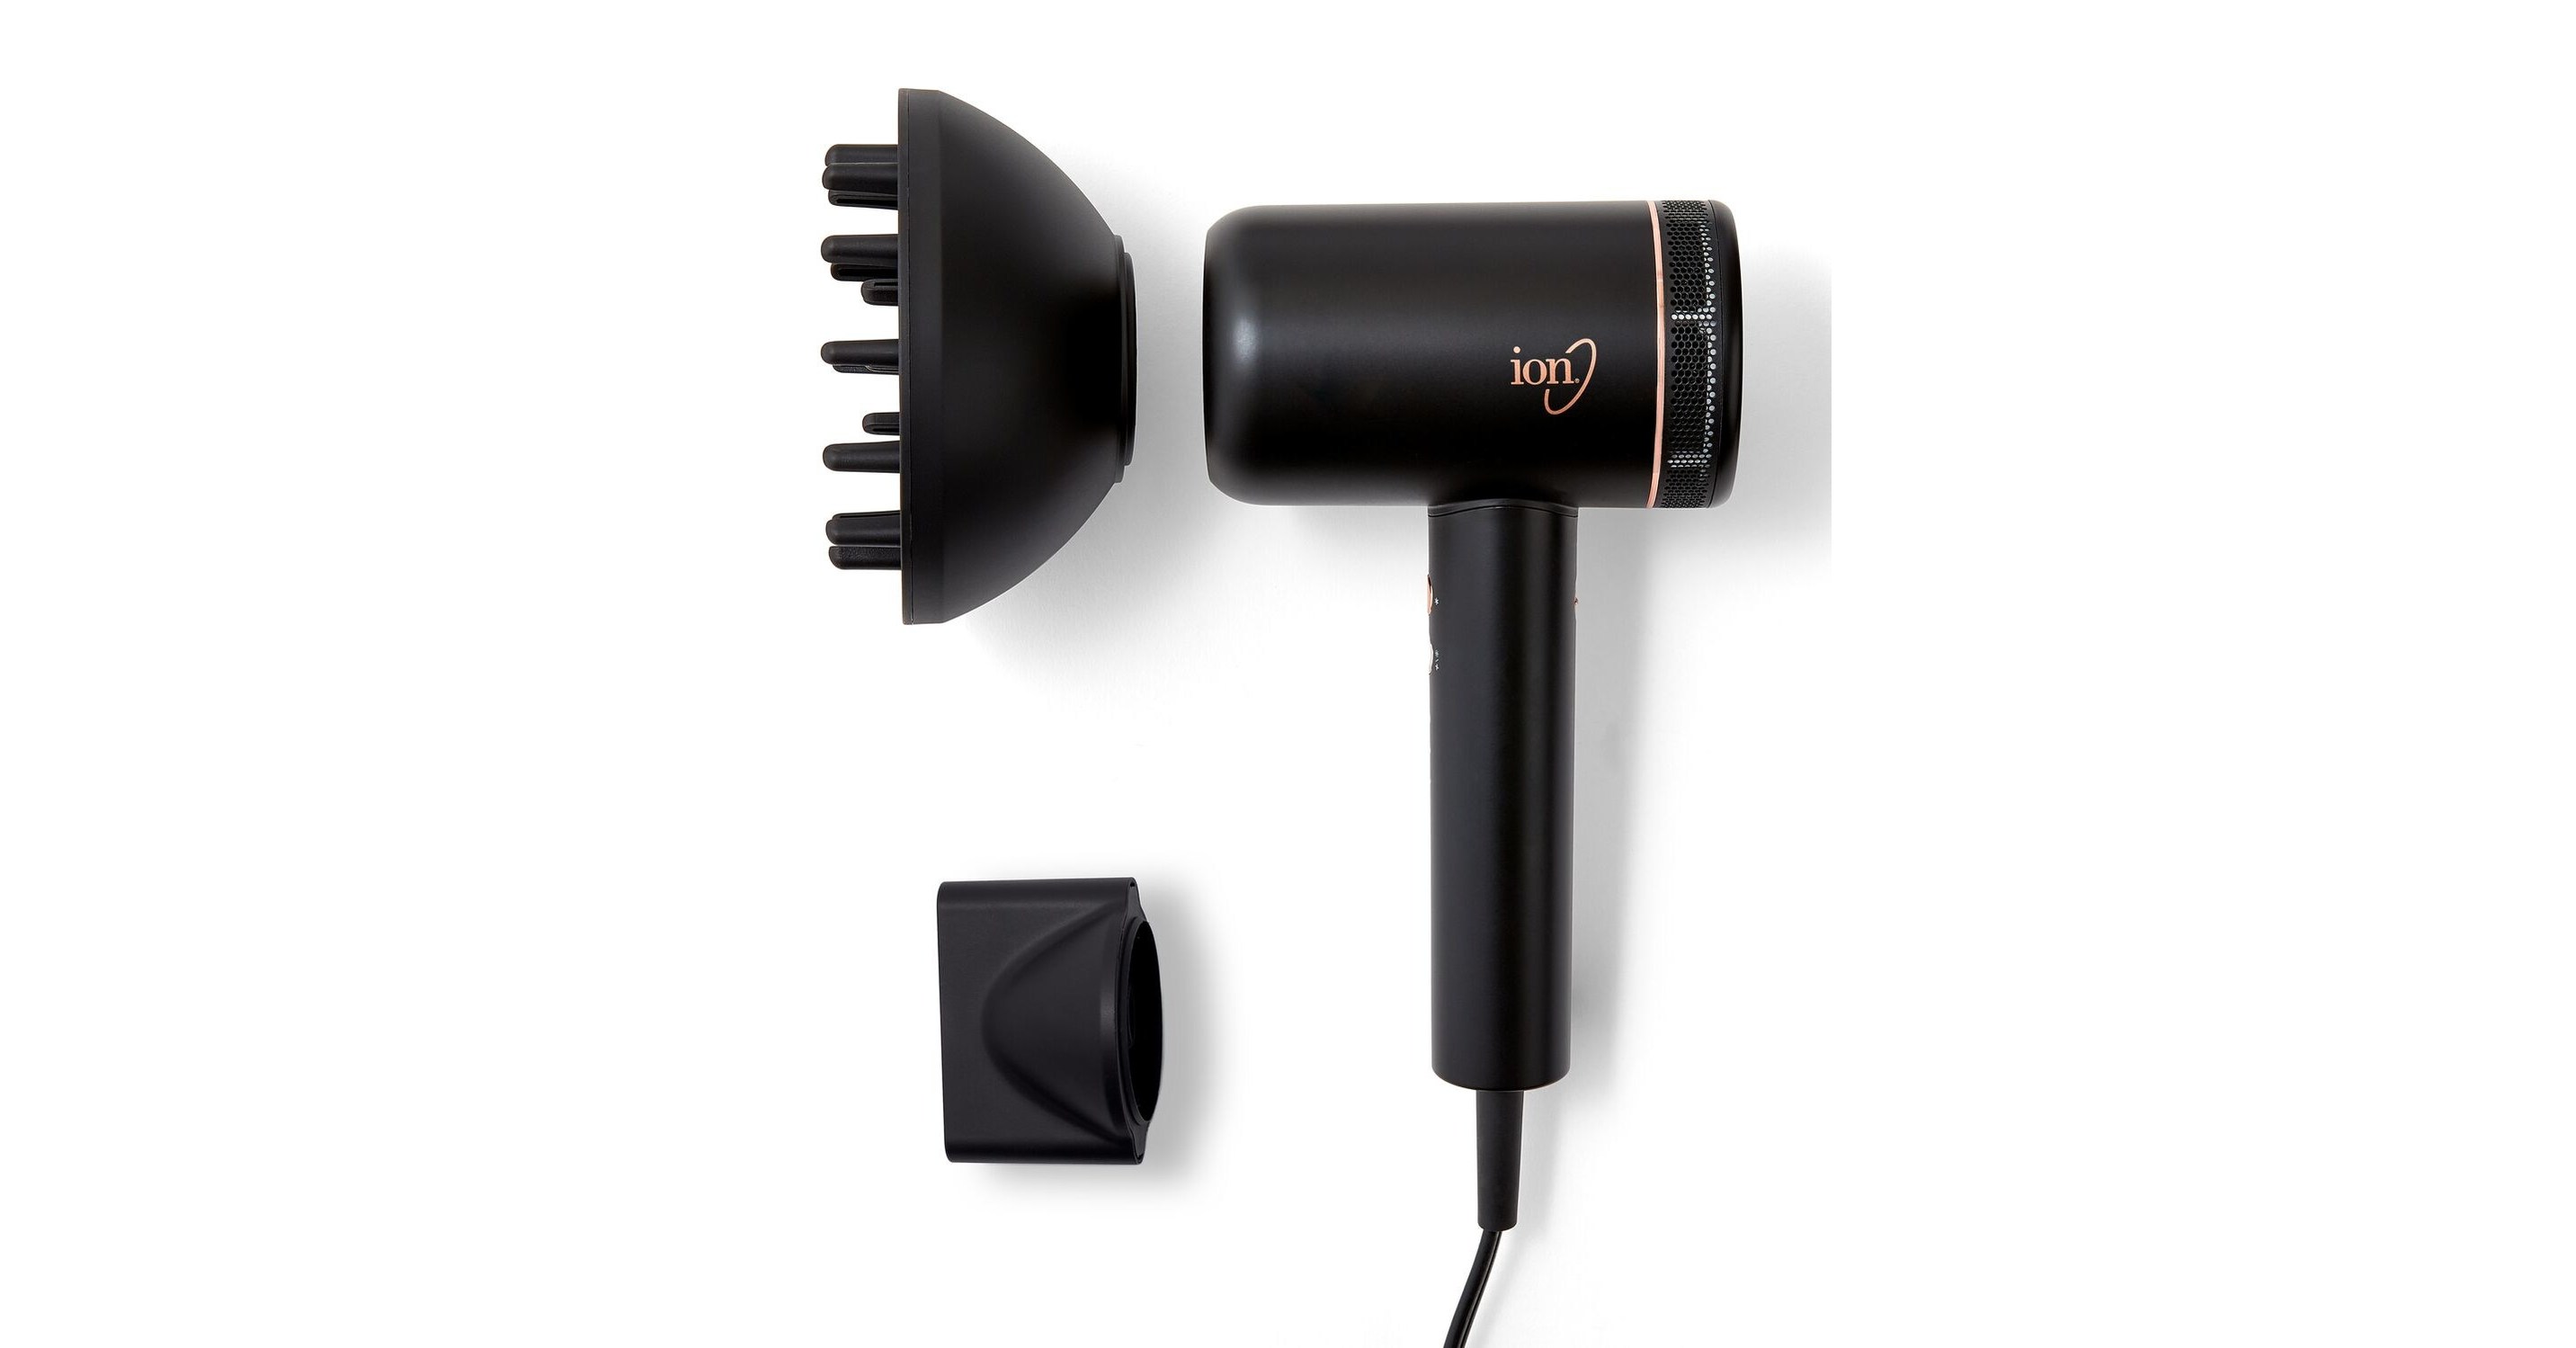 Sally Beauty Blows Away the Competition With New Ion Luxe Supercharged Hair Dryer